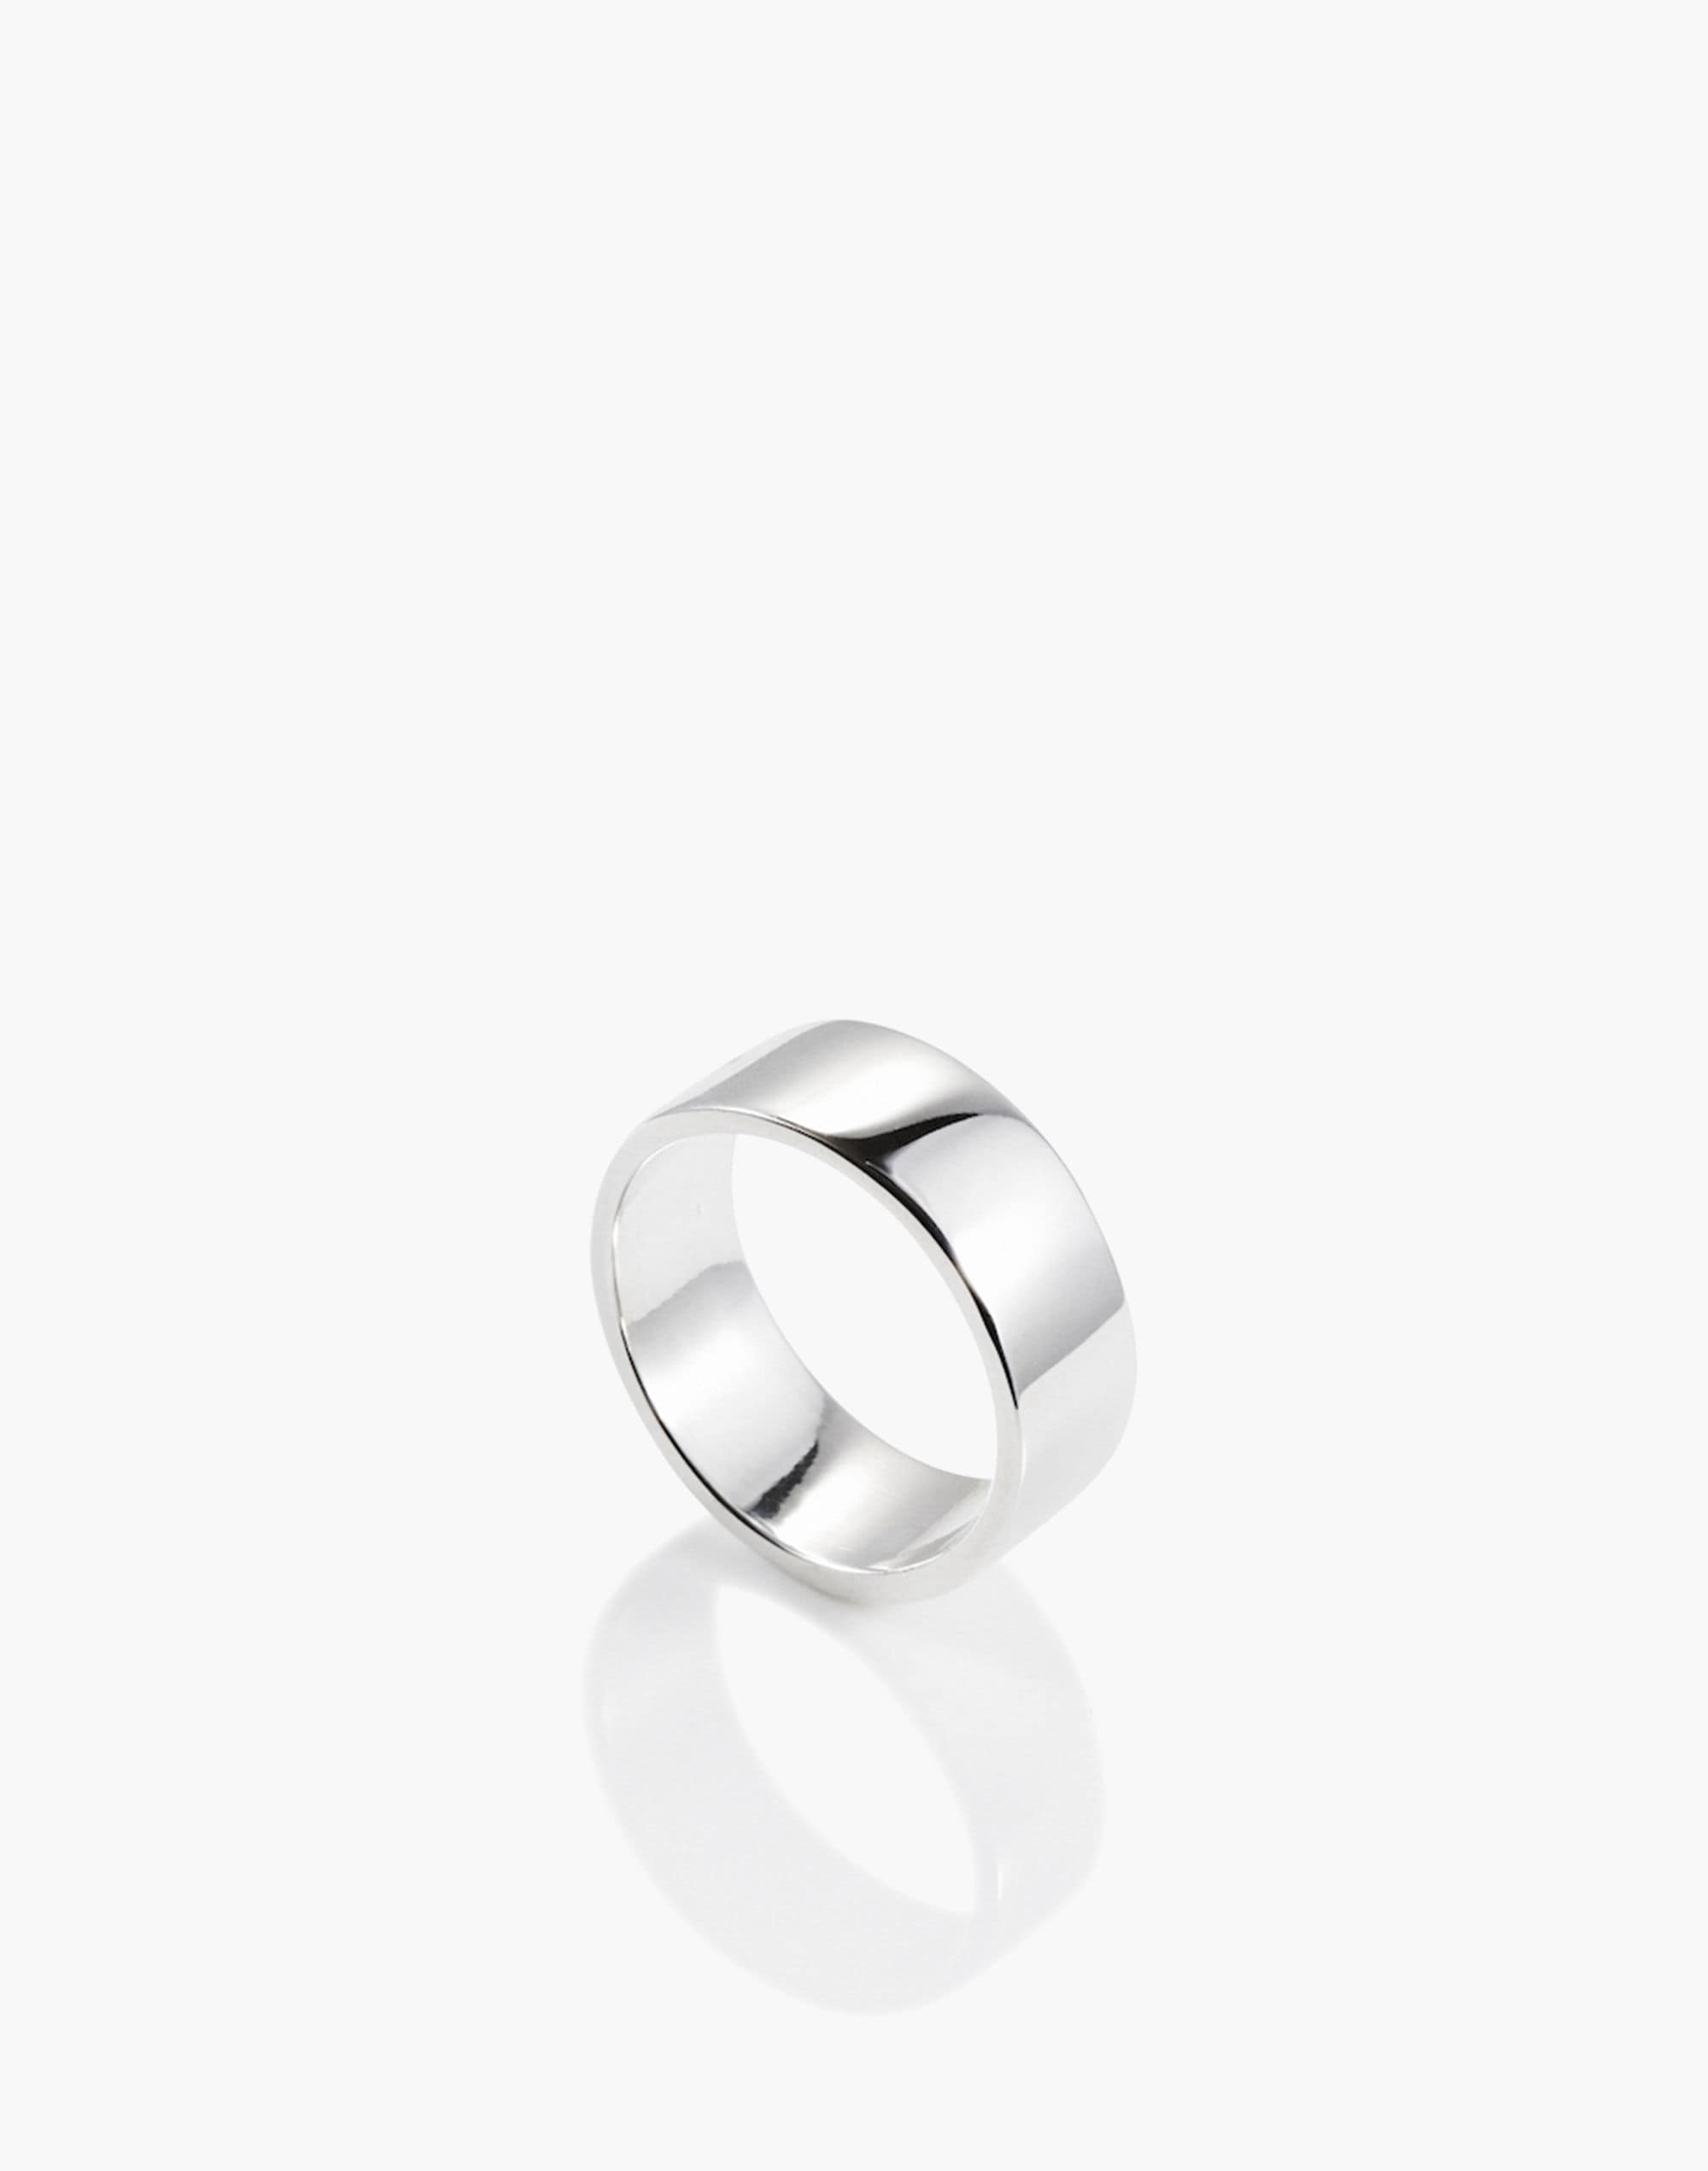 Charlotte Cauwe Studio Wide Band in Sterling Silver